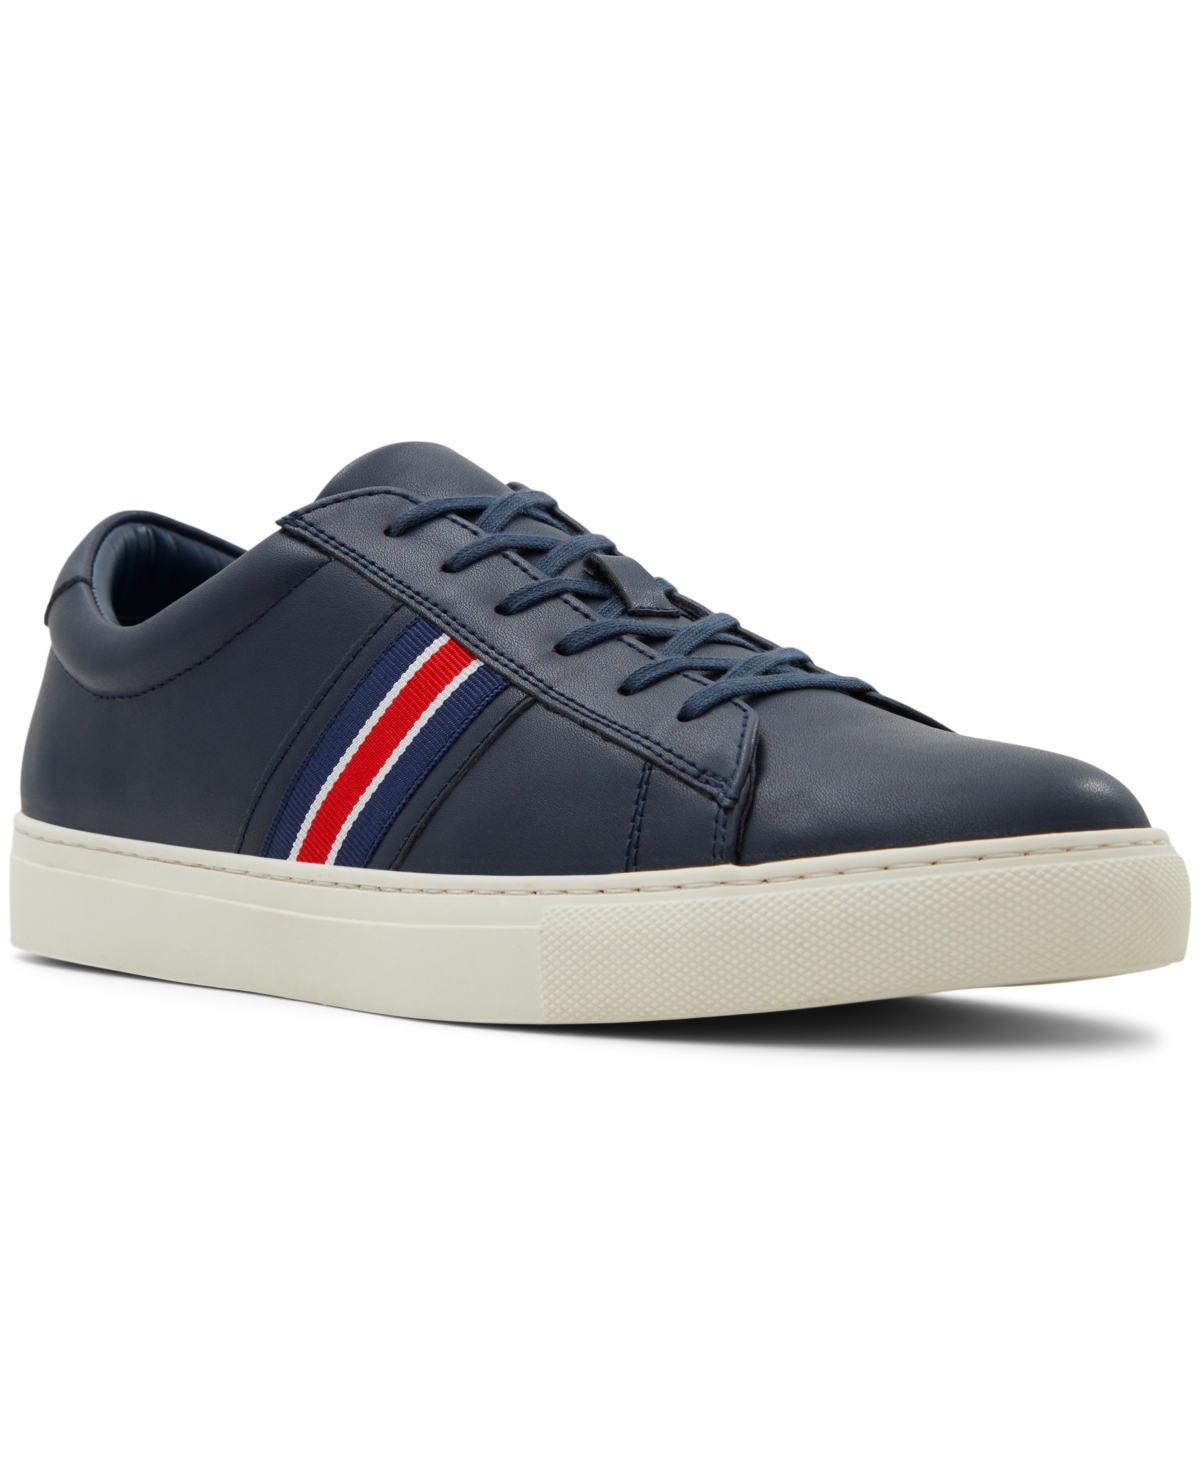 Men's Pryce Low Top Lace-Up Sneakers - Navy